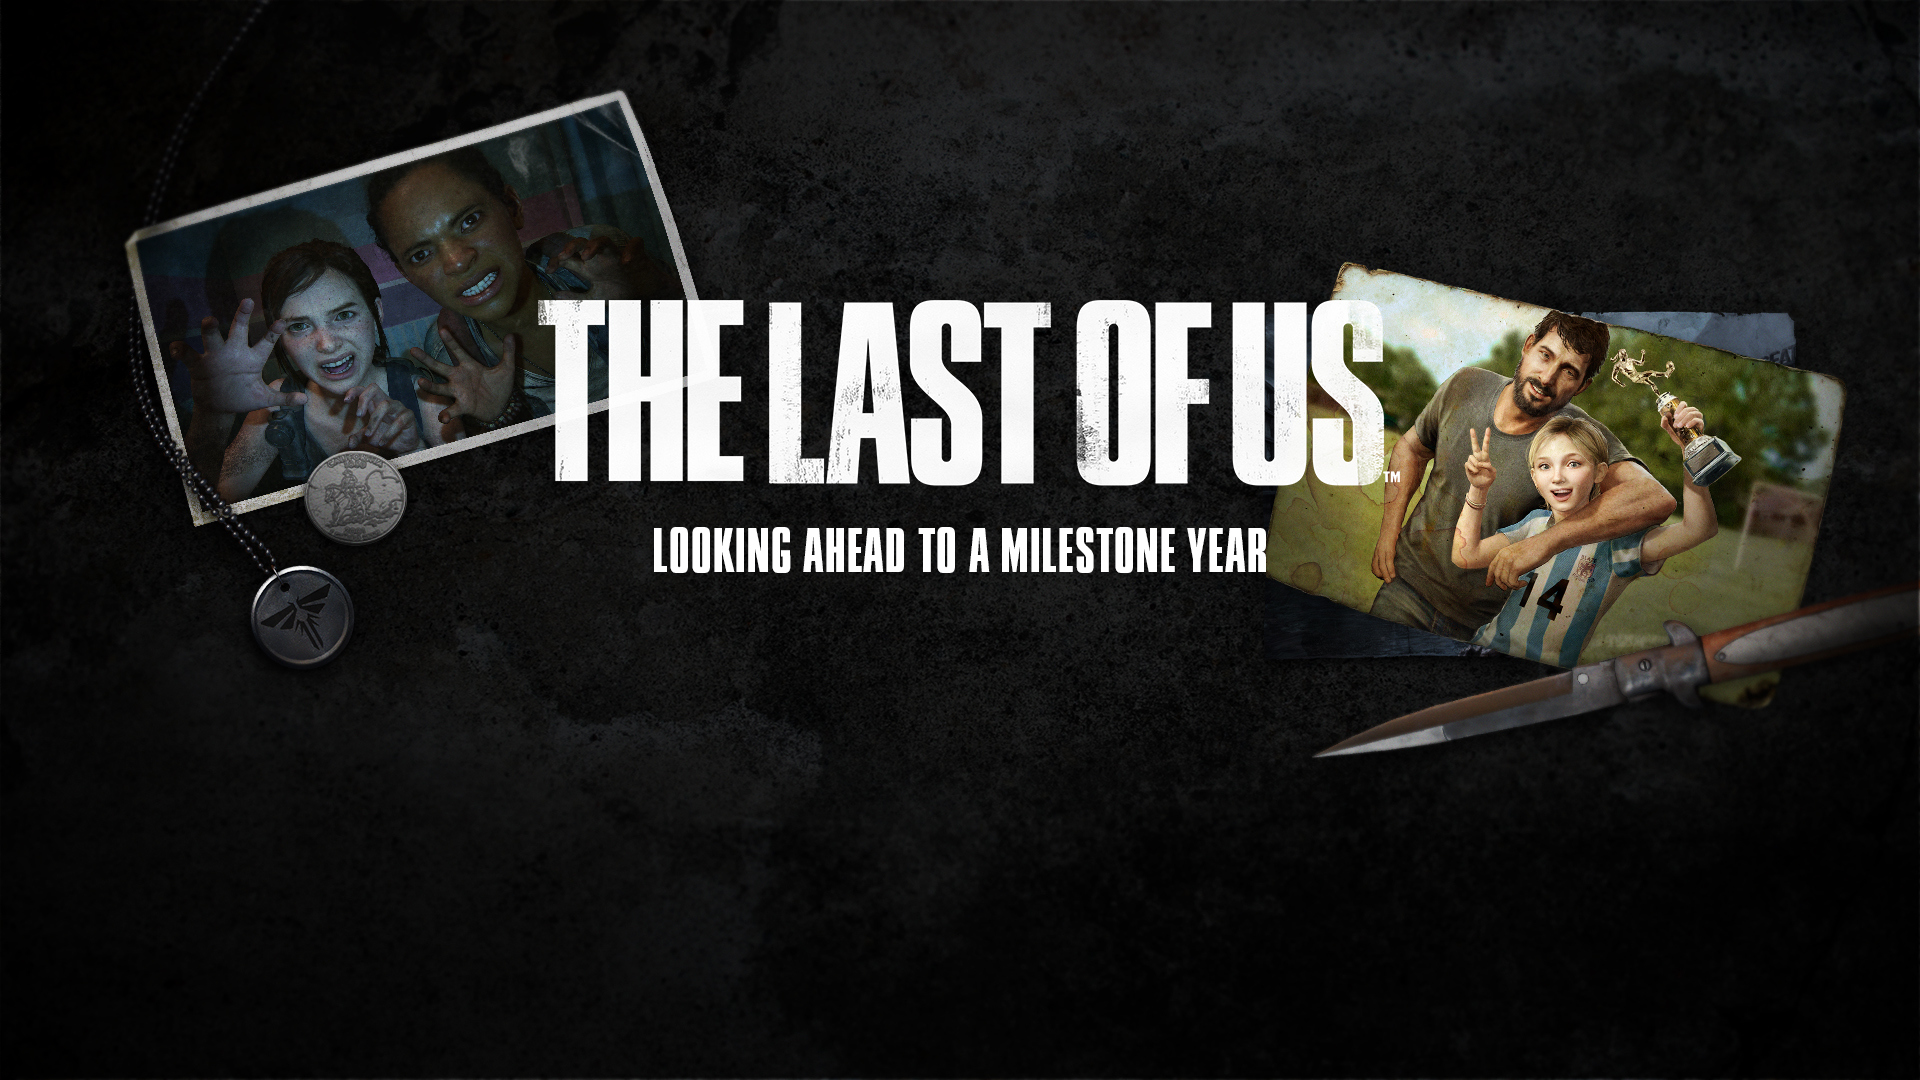 Reflecting on a Big Year to Come for The Last of Us